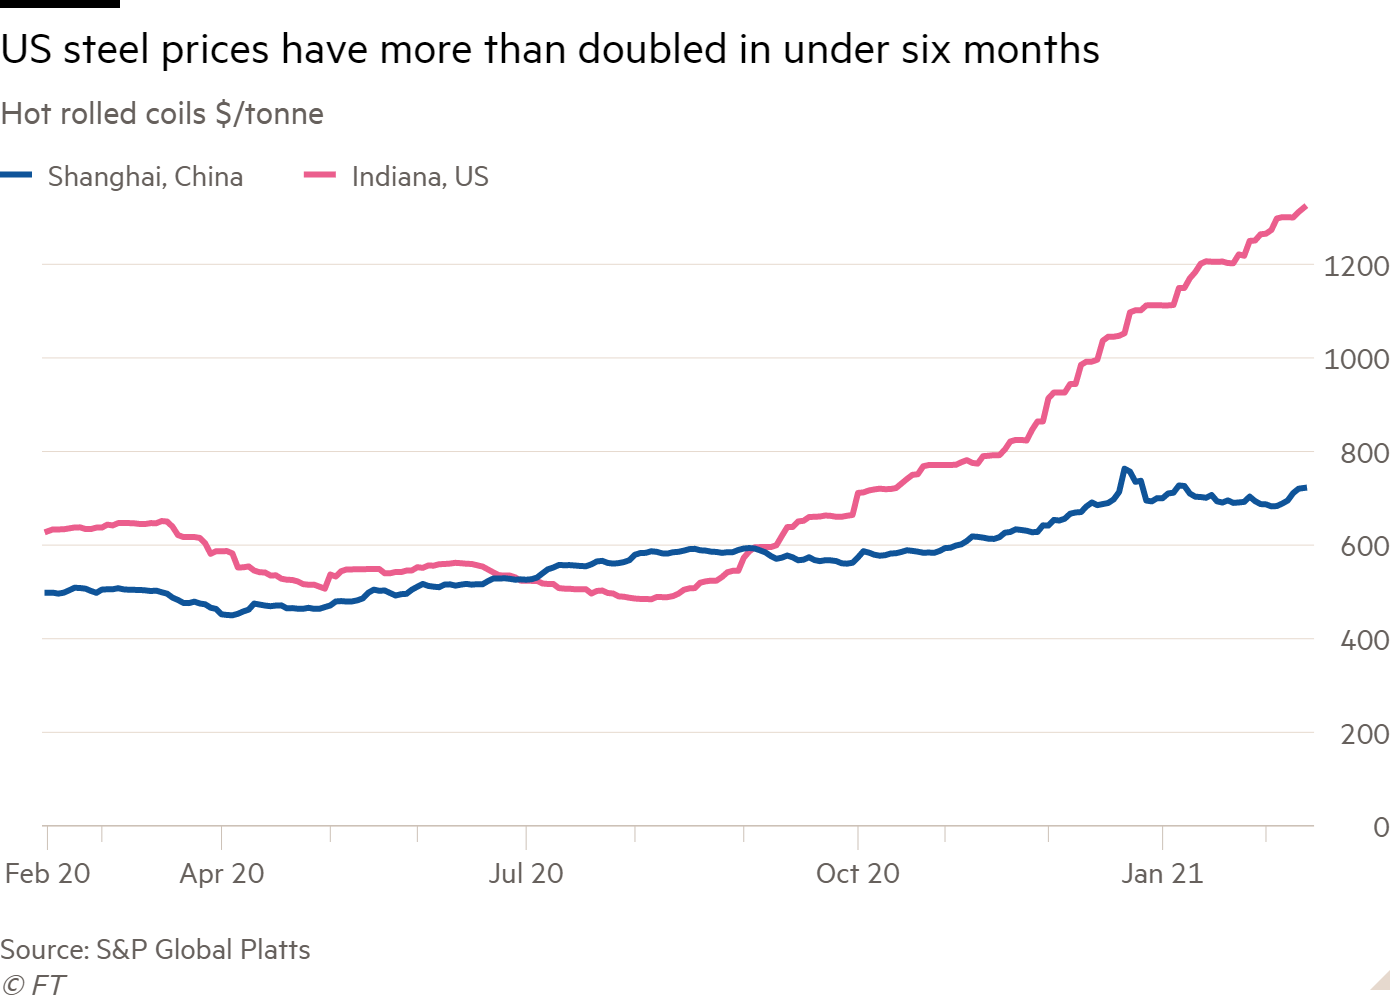 US steel prices have more than doubled in under 6 months